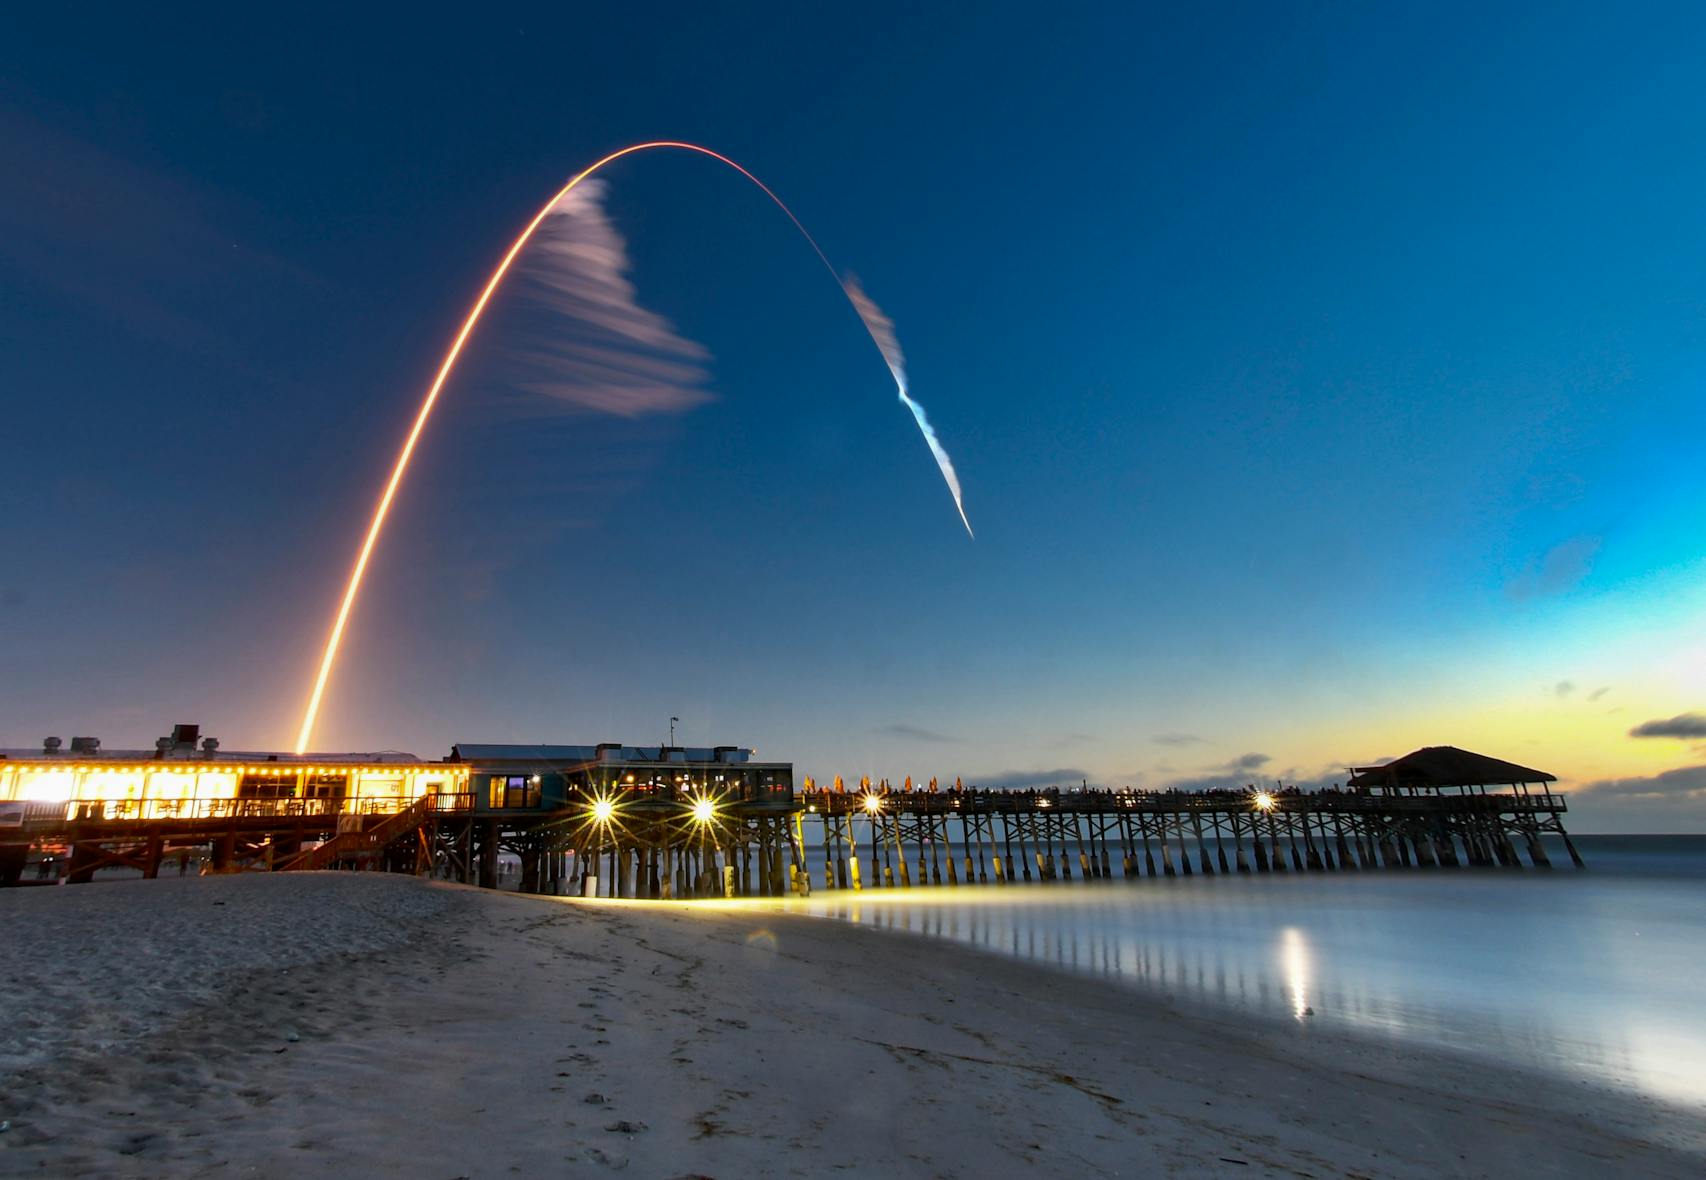 A United Launch Alliance Atlas V rocket lifts off at Cape Canaveral with the Cocoa Beach, Fla., Pier in the foreground.